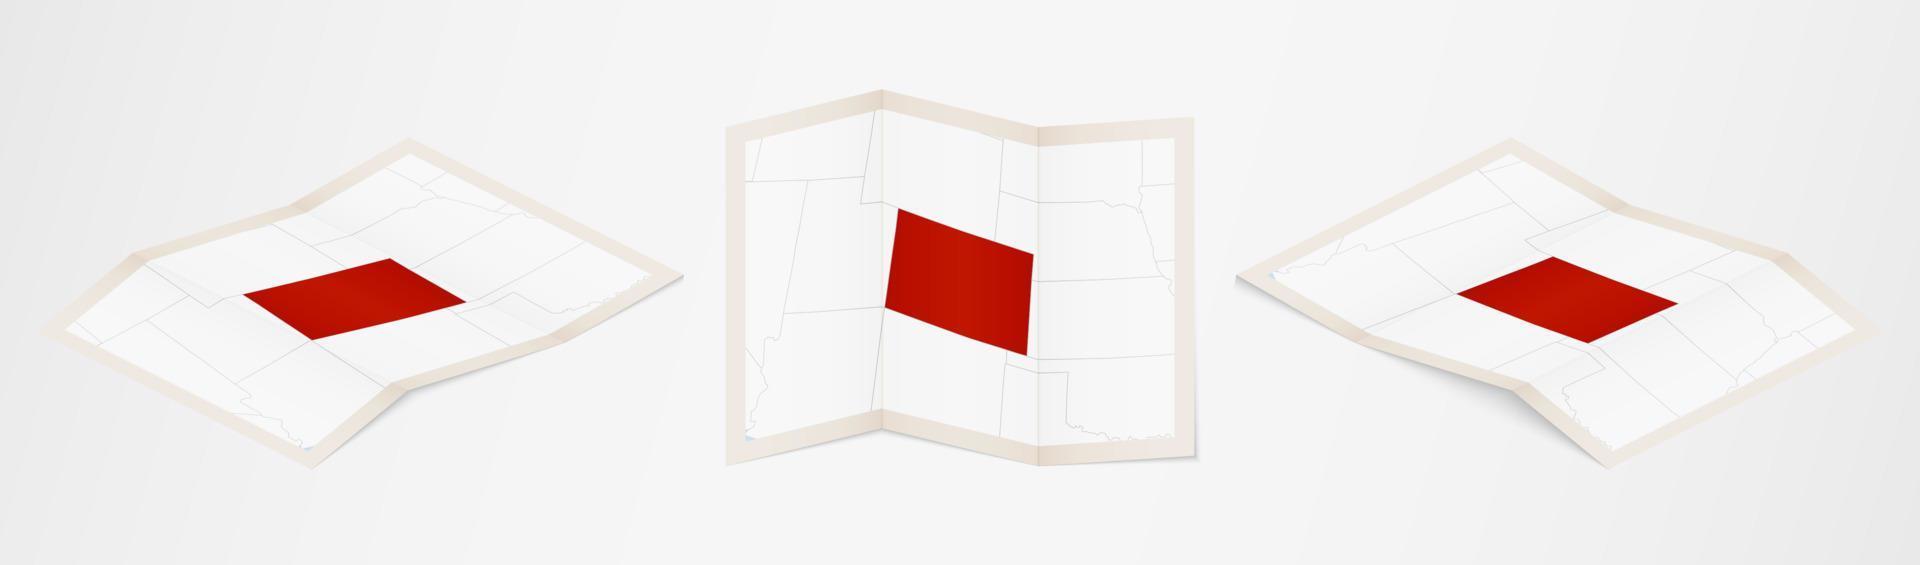 Folded map of Colorado in three different versions. vector